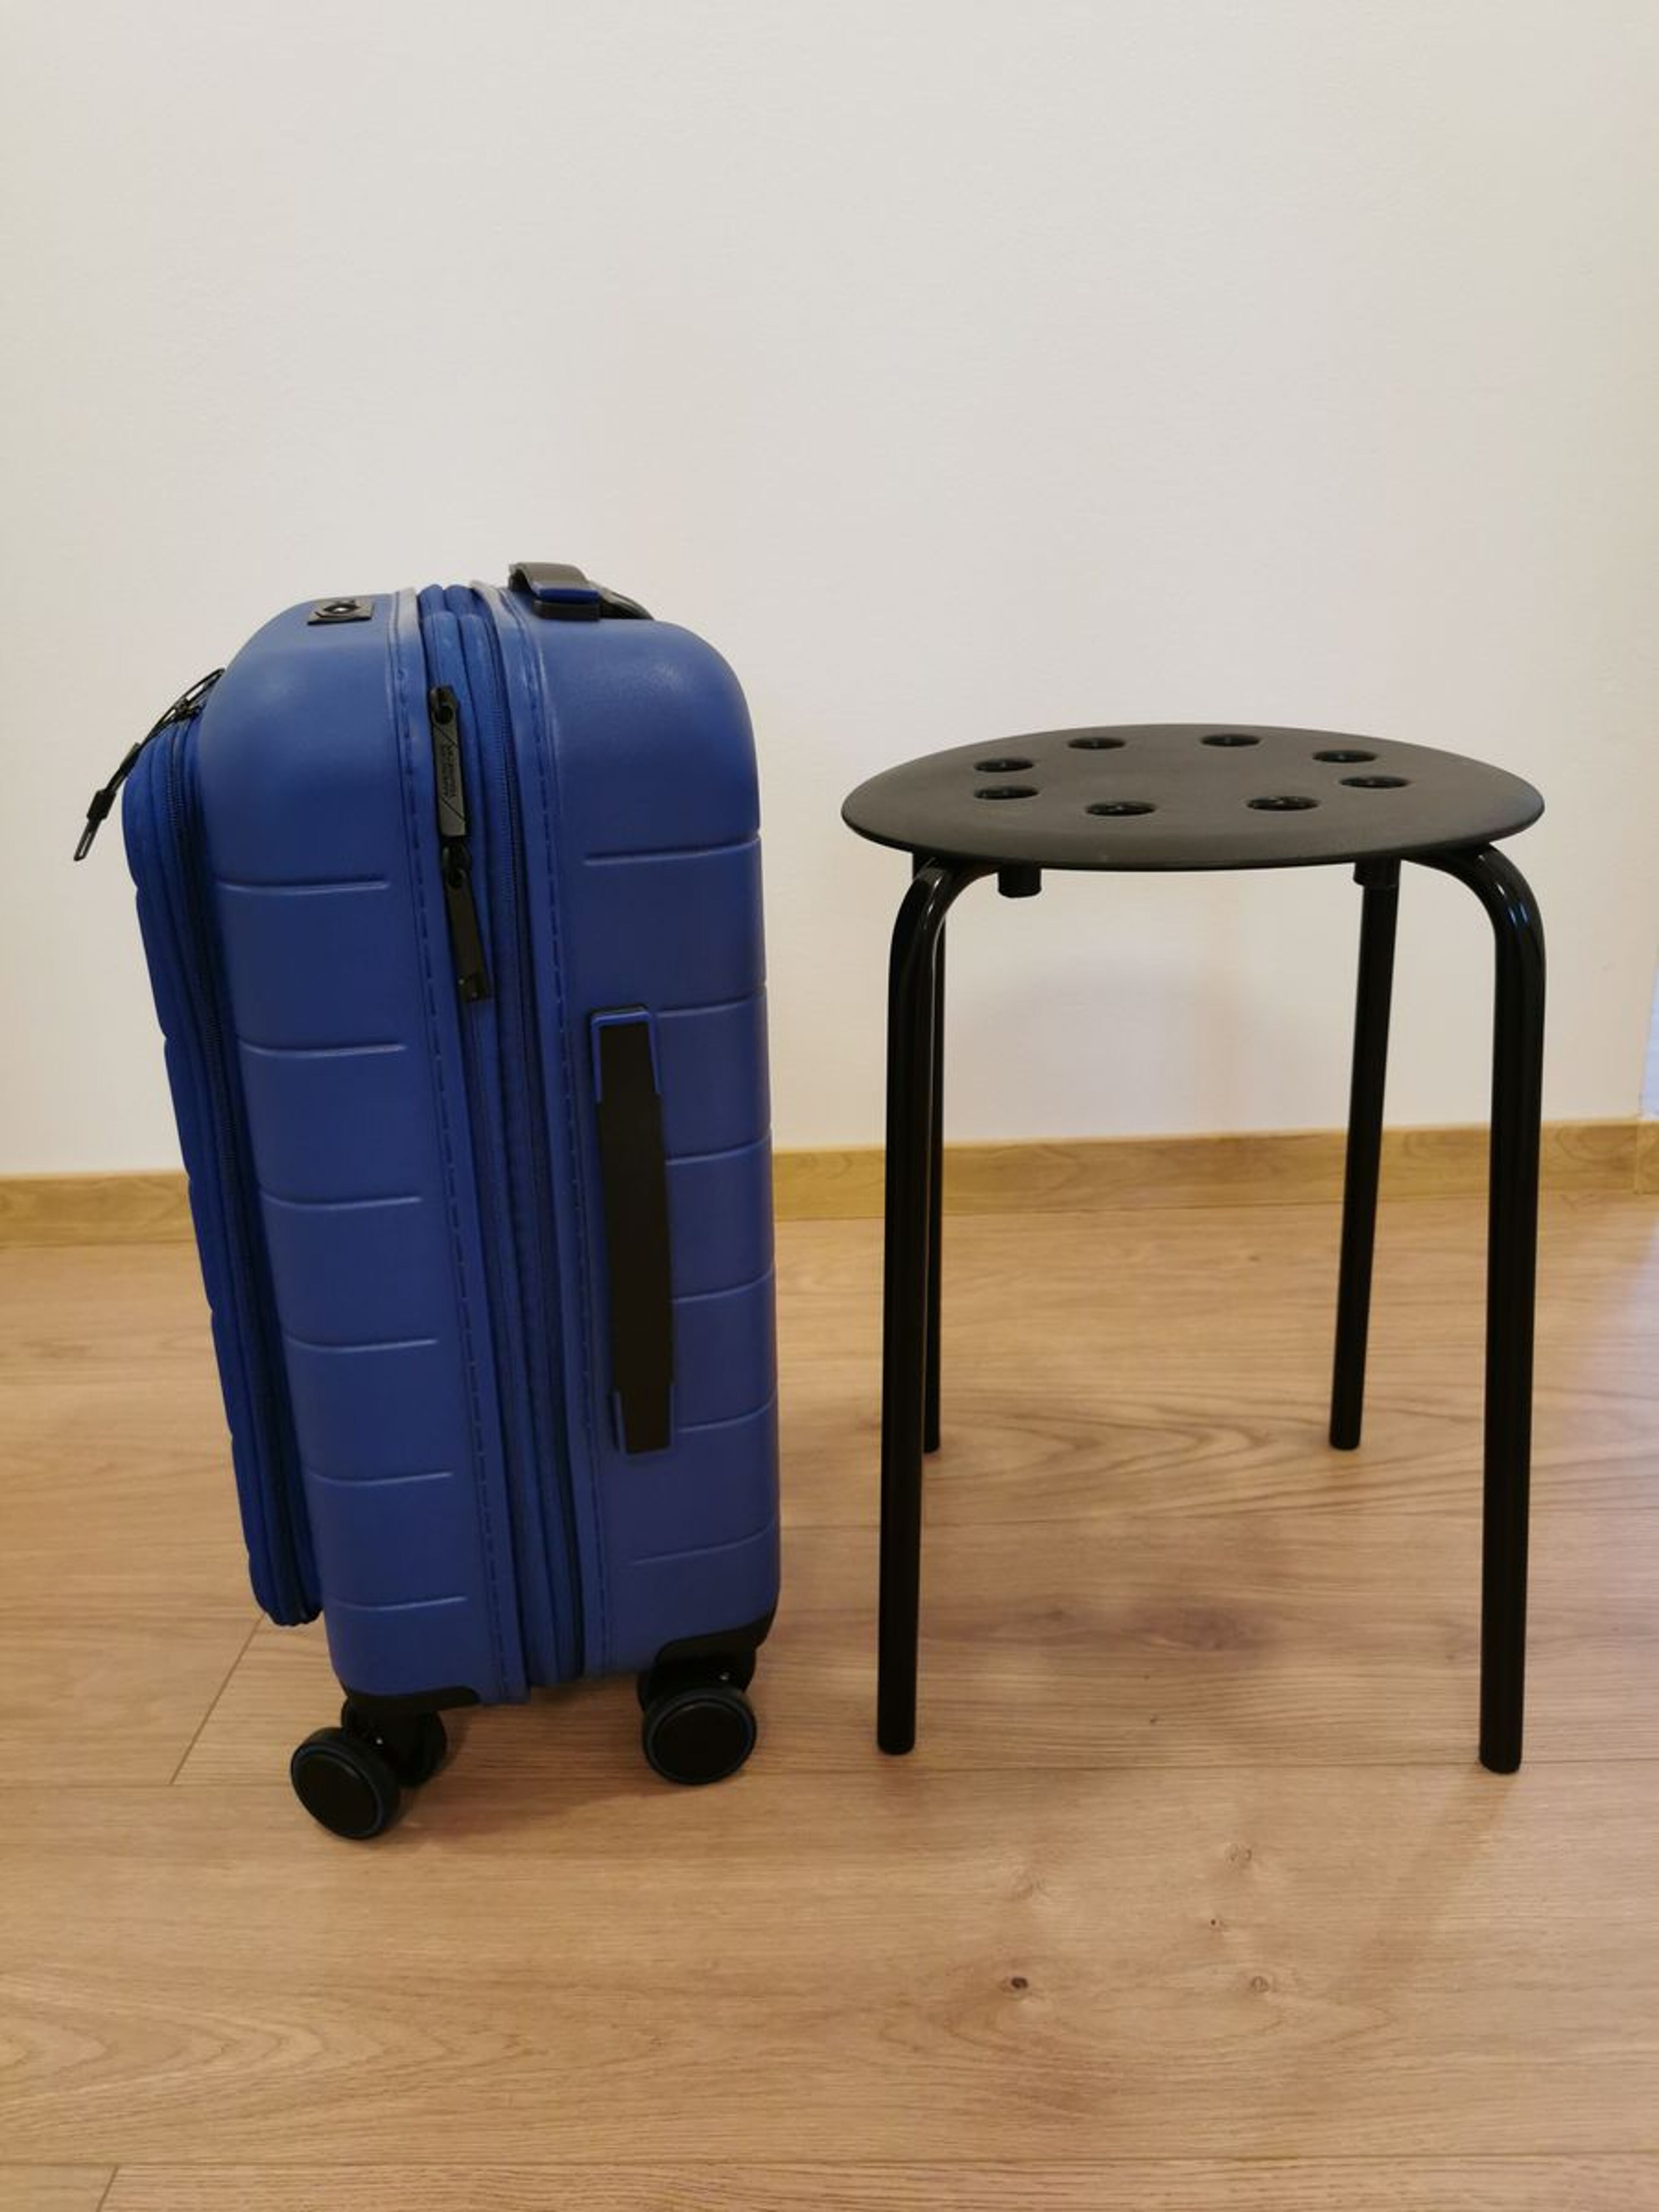 Review for American Tourister - Novastream - Spinner 55 EXP + Laptop Compartment Travel Suitcase - image from Tereza